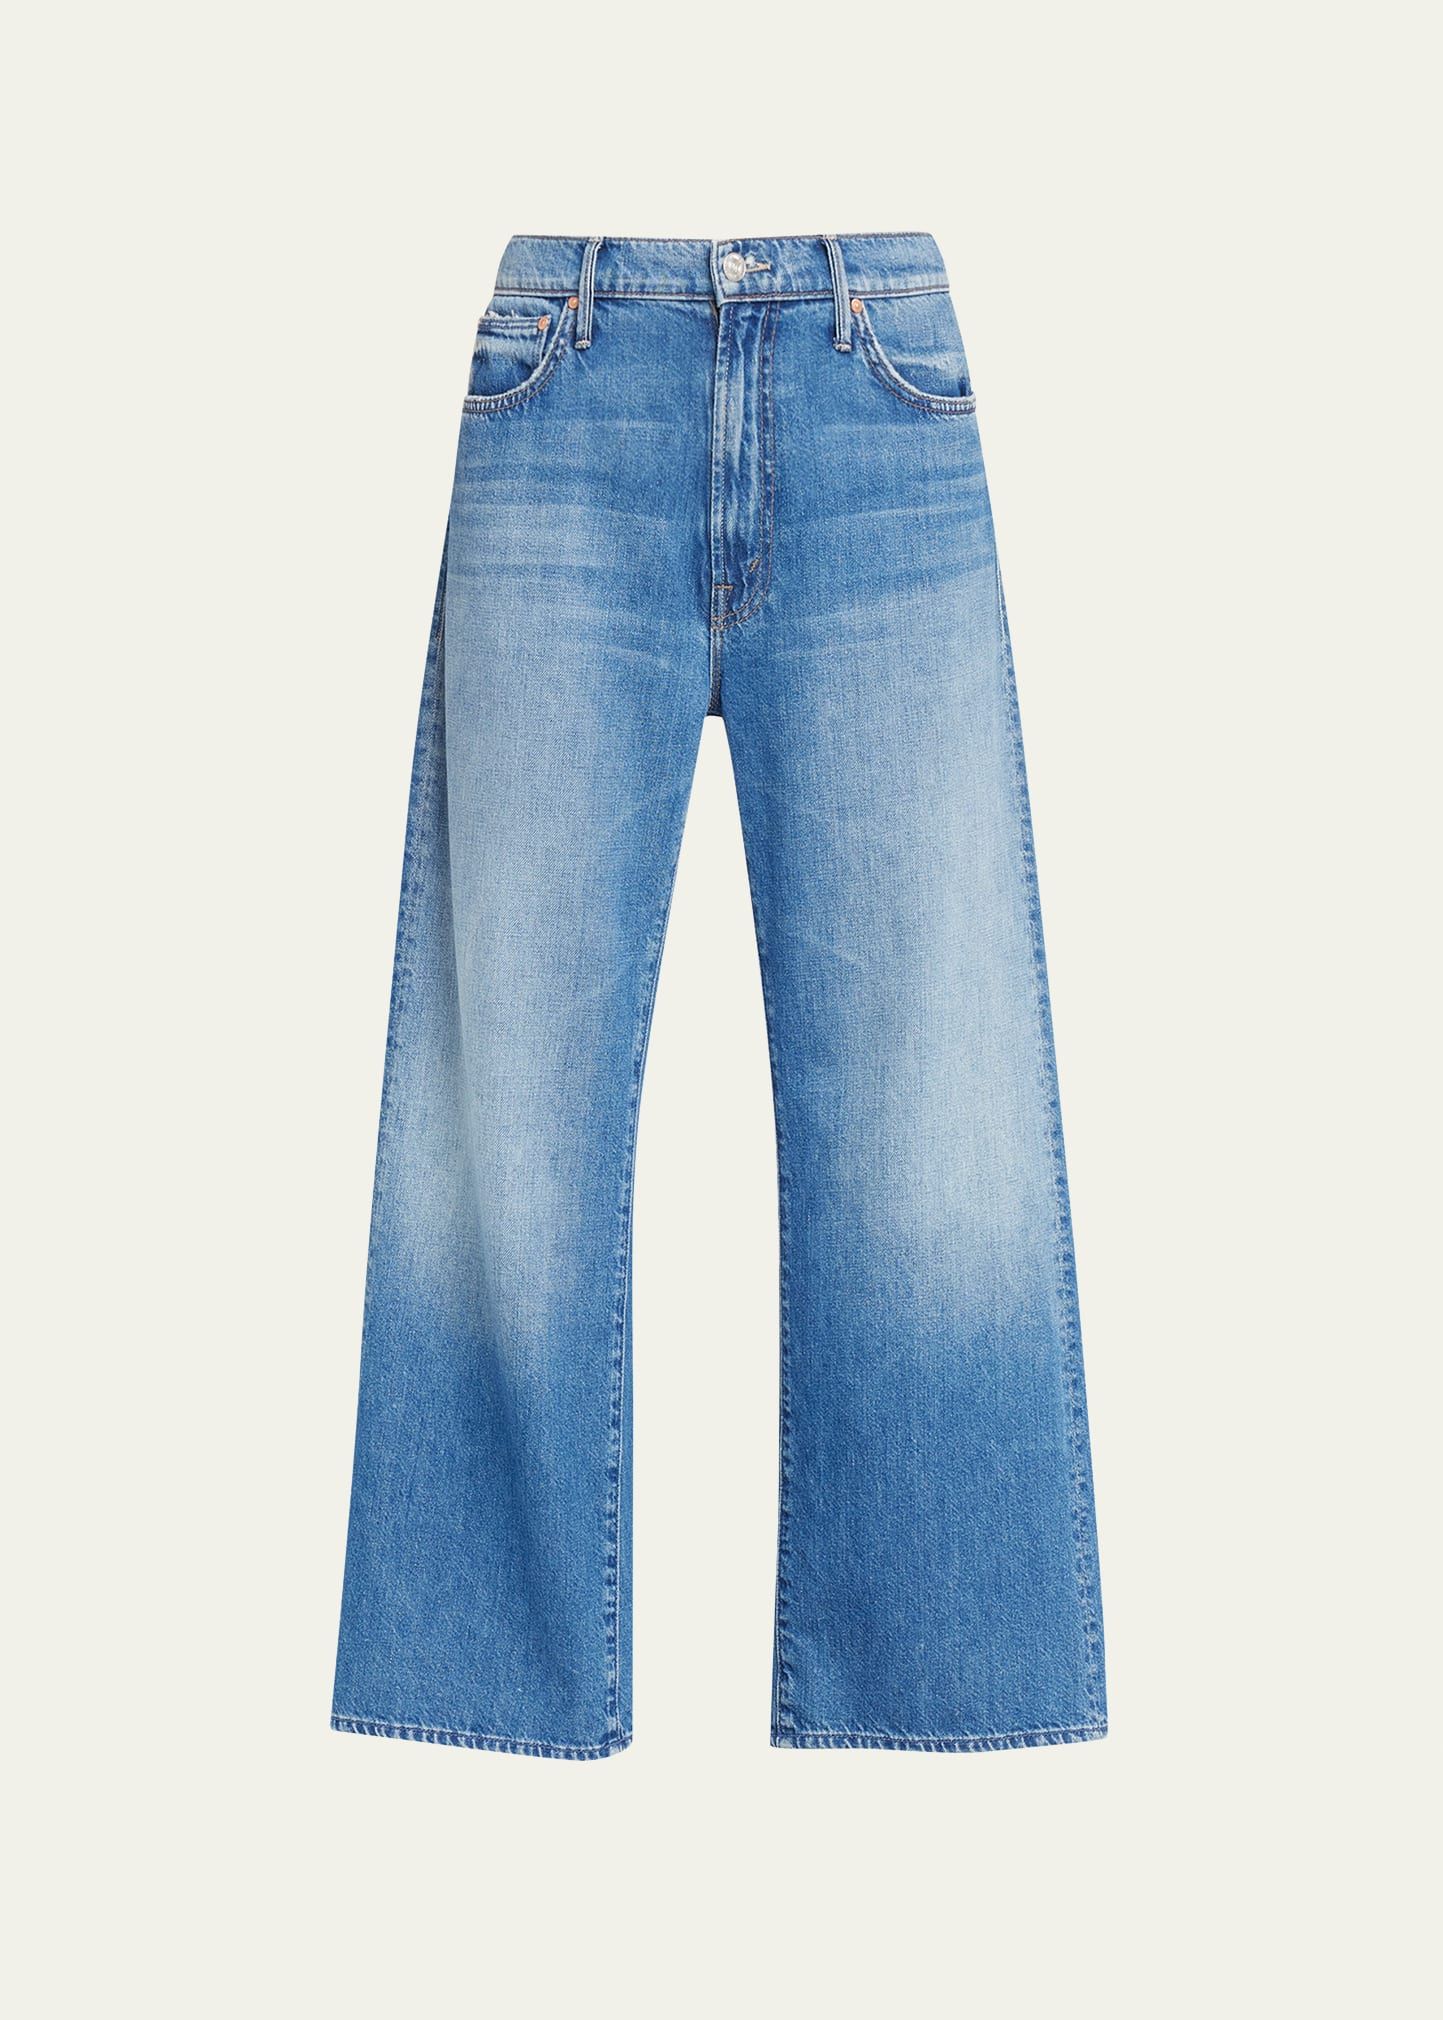 MOTHER The Dodger Ankle Jeans | Bergdorf Goodman